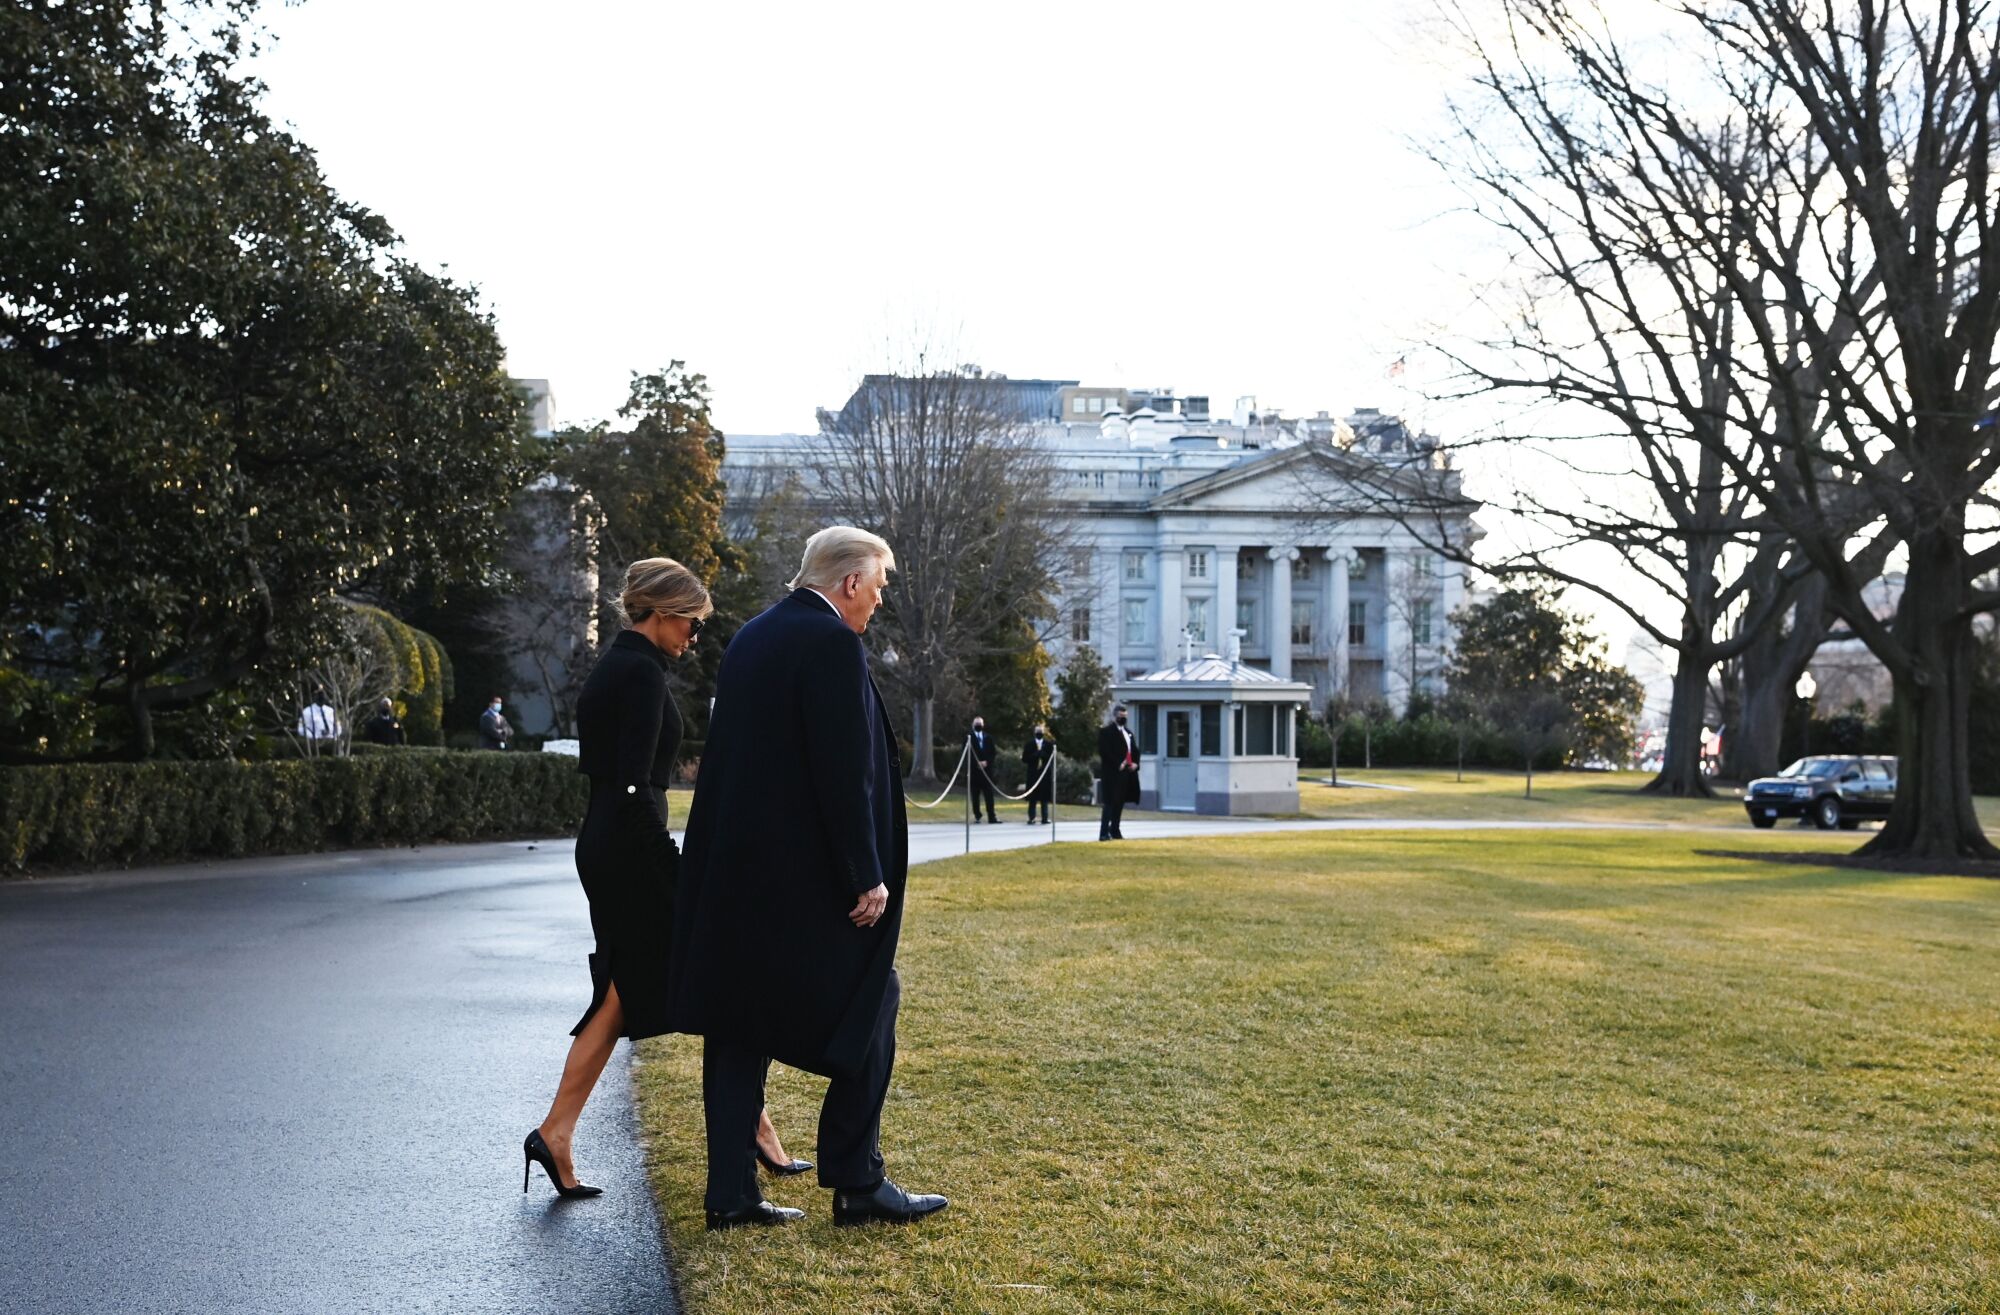 President Trump and First Lady Melania Trump make their way to Marine One as they depart the White House.